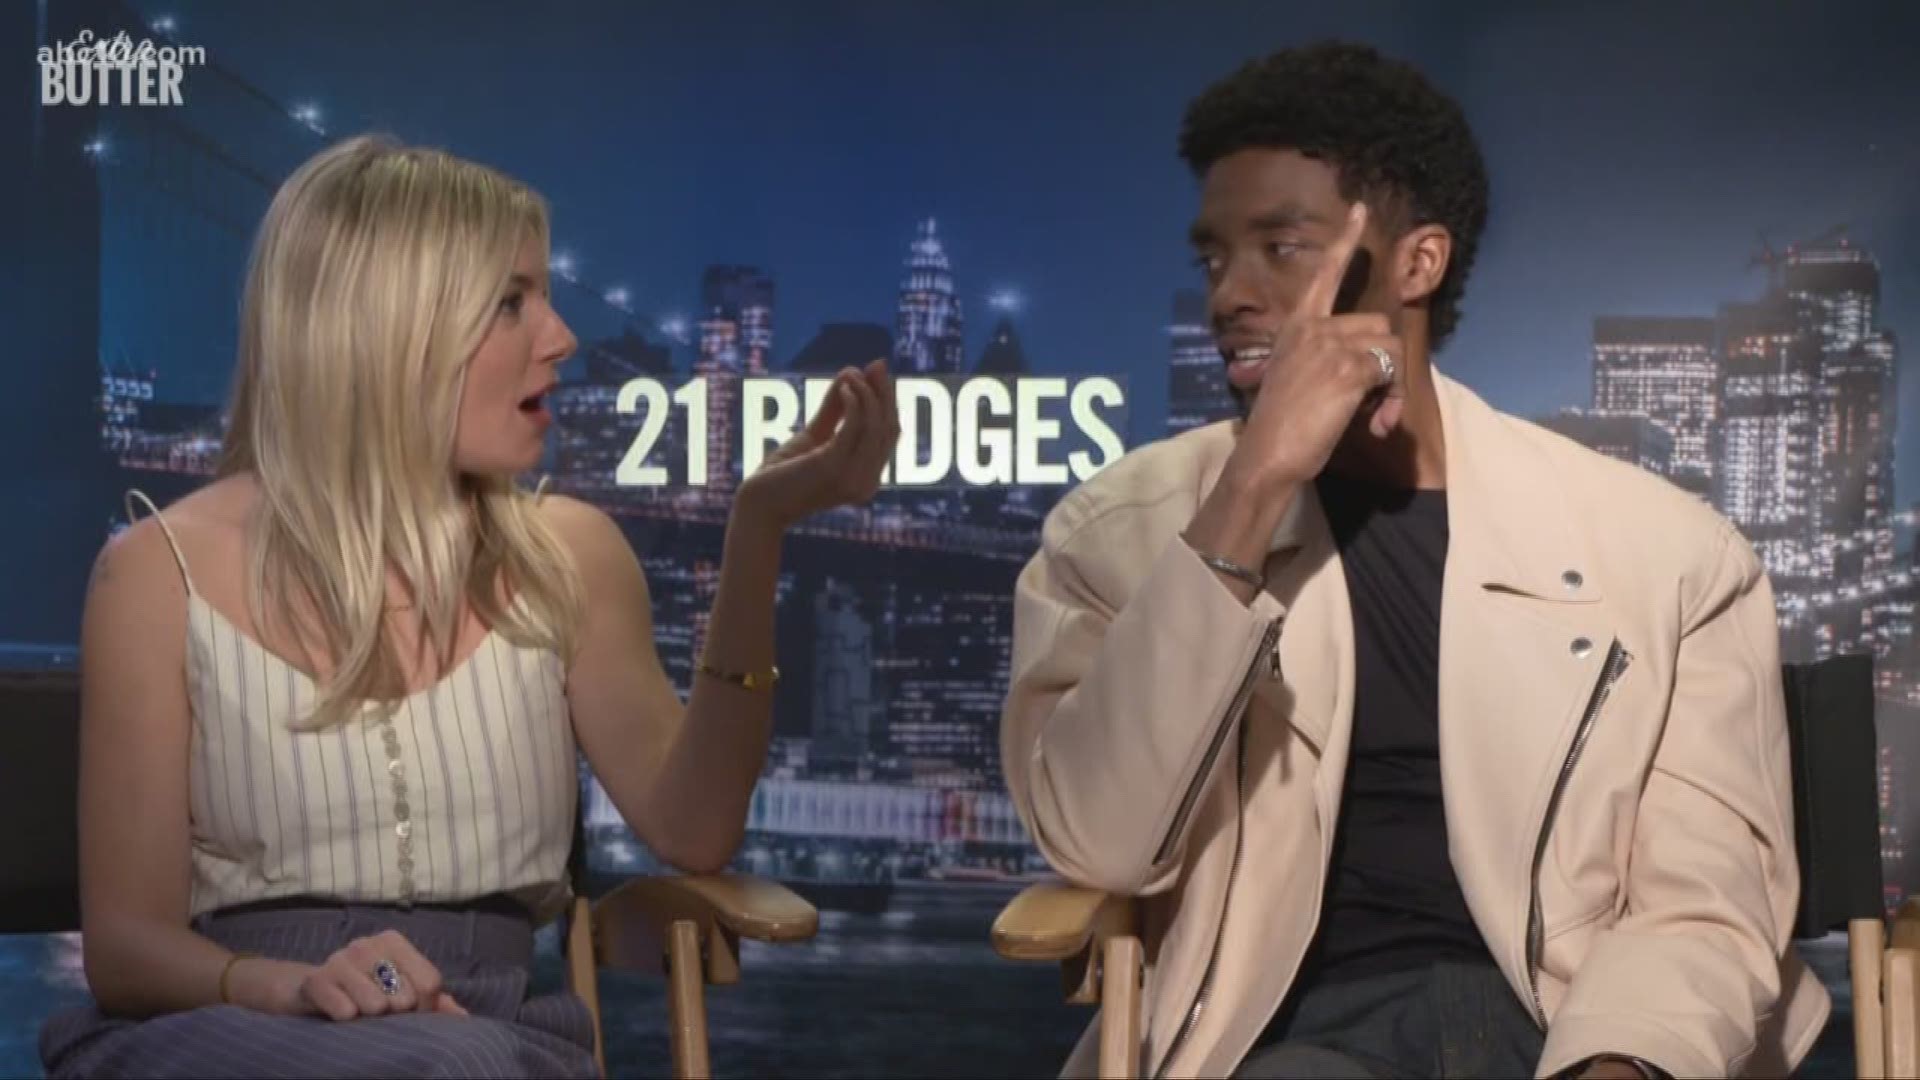 Mark S. Allen sits down with Chadwick Boseman and Sienna Miller about the movie "21 Bridges," which is now available to watch on streaming devices.